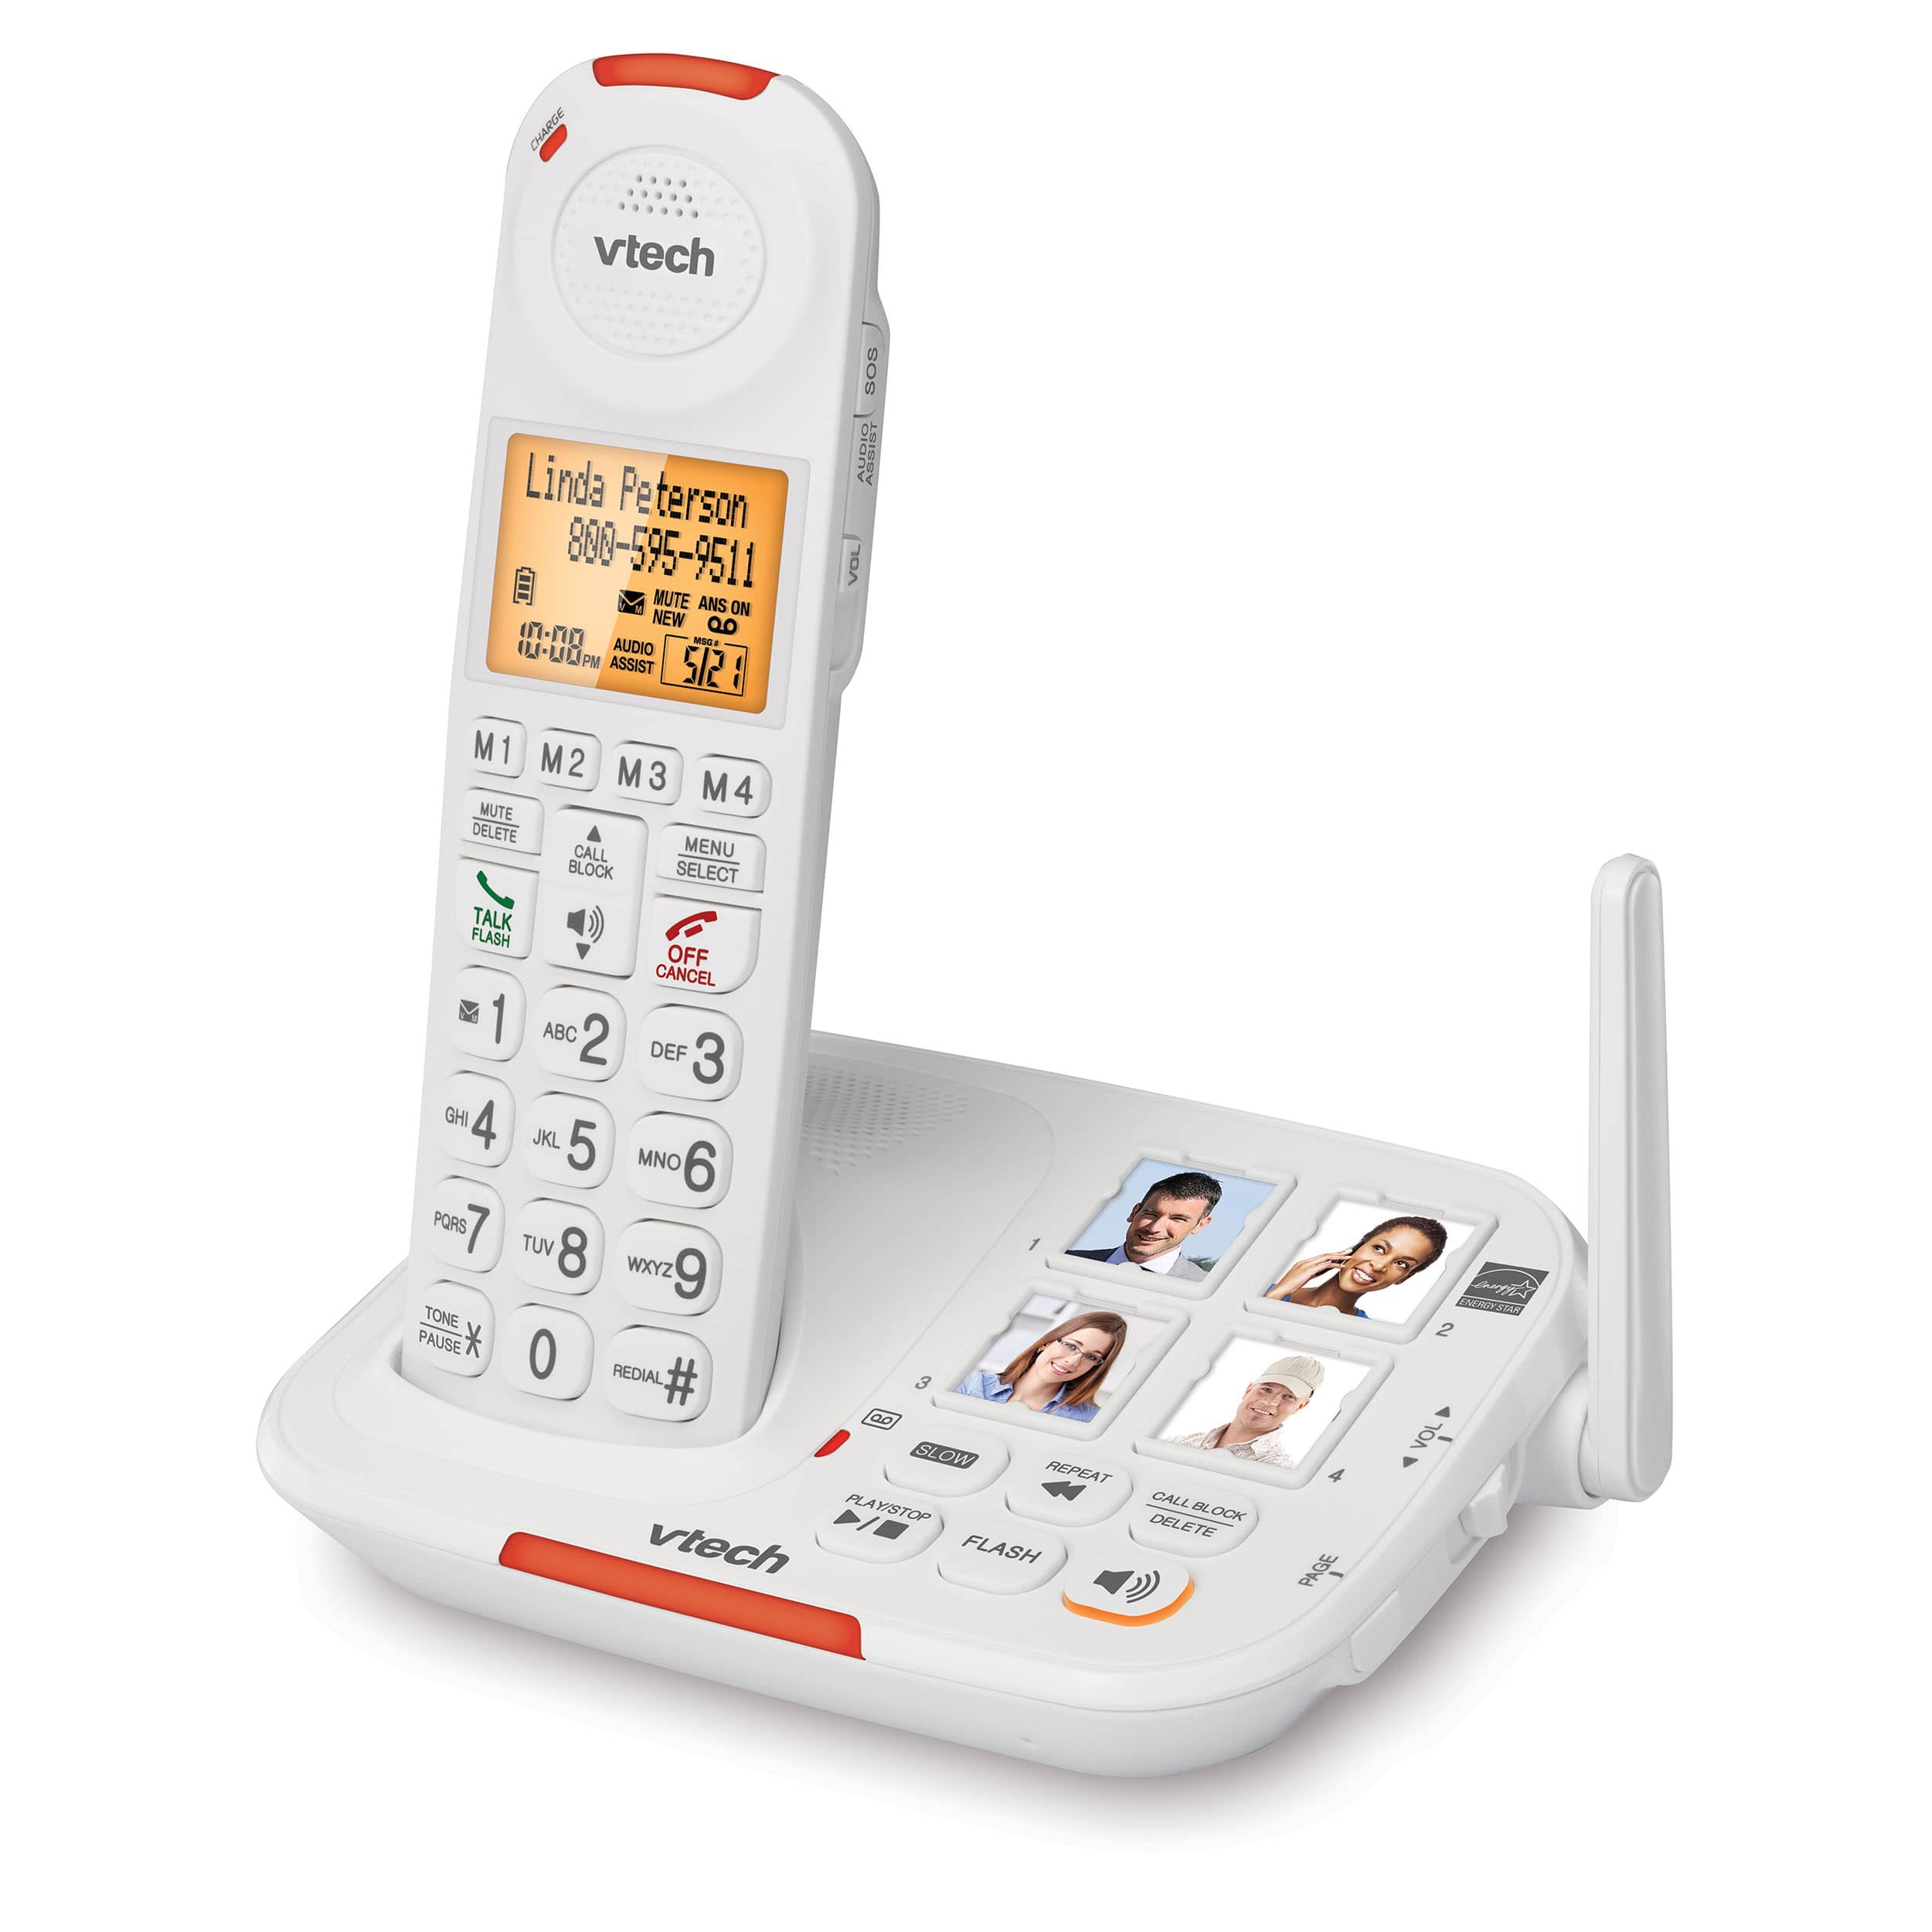 Amplified Cordless Phone with Answering System, Big Buttons, Extra-Loud Ringer & Smart Call Blocker - view 2